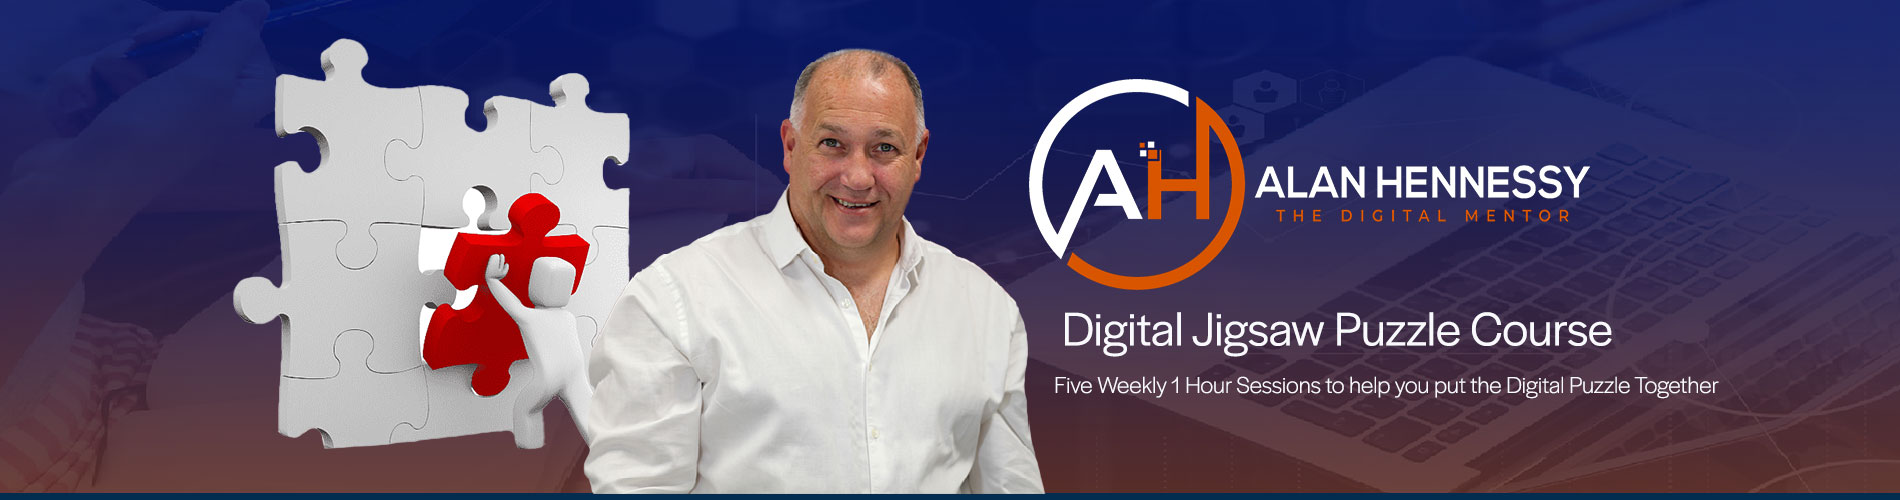 The Digital Jigsaw Puzzle with Alan Hennessy The Digital Mentor